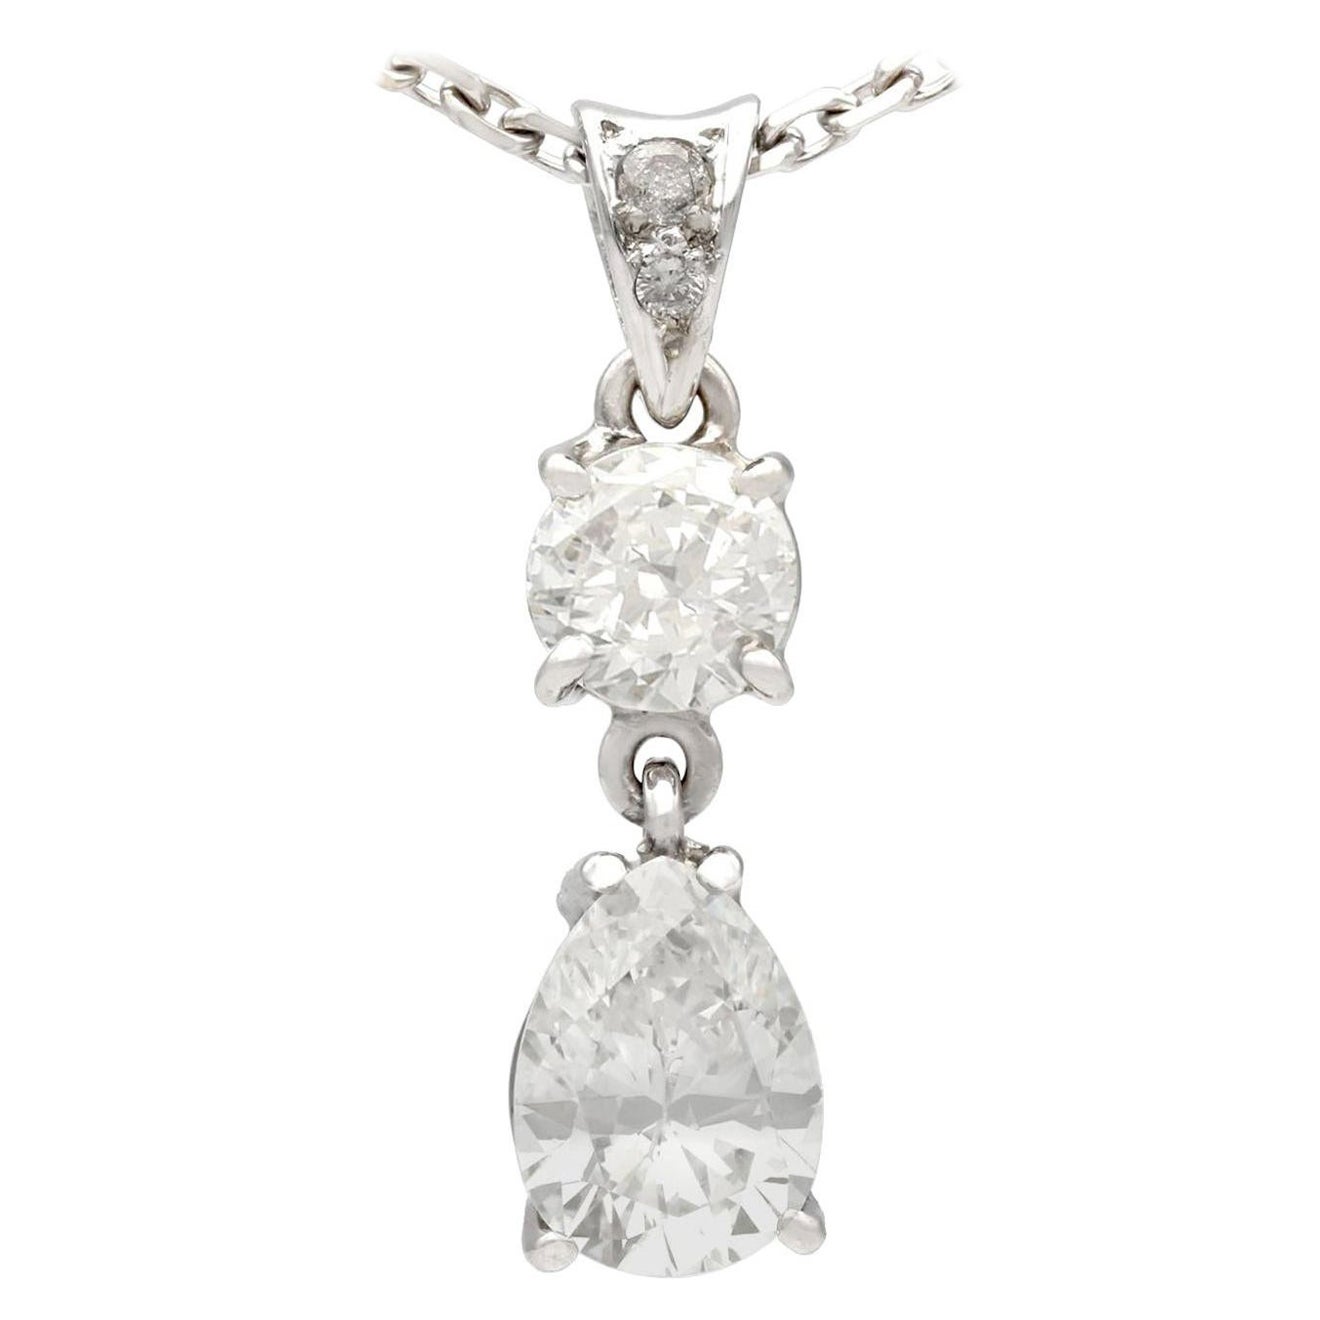 1990s French 1.55 Carat Diamond and White Gold Pendant